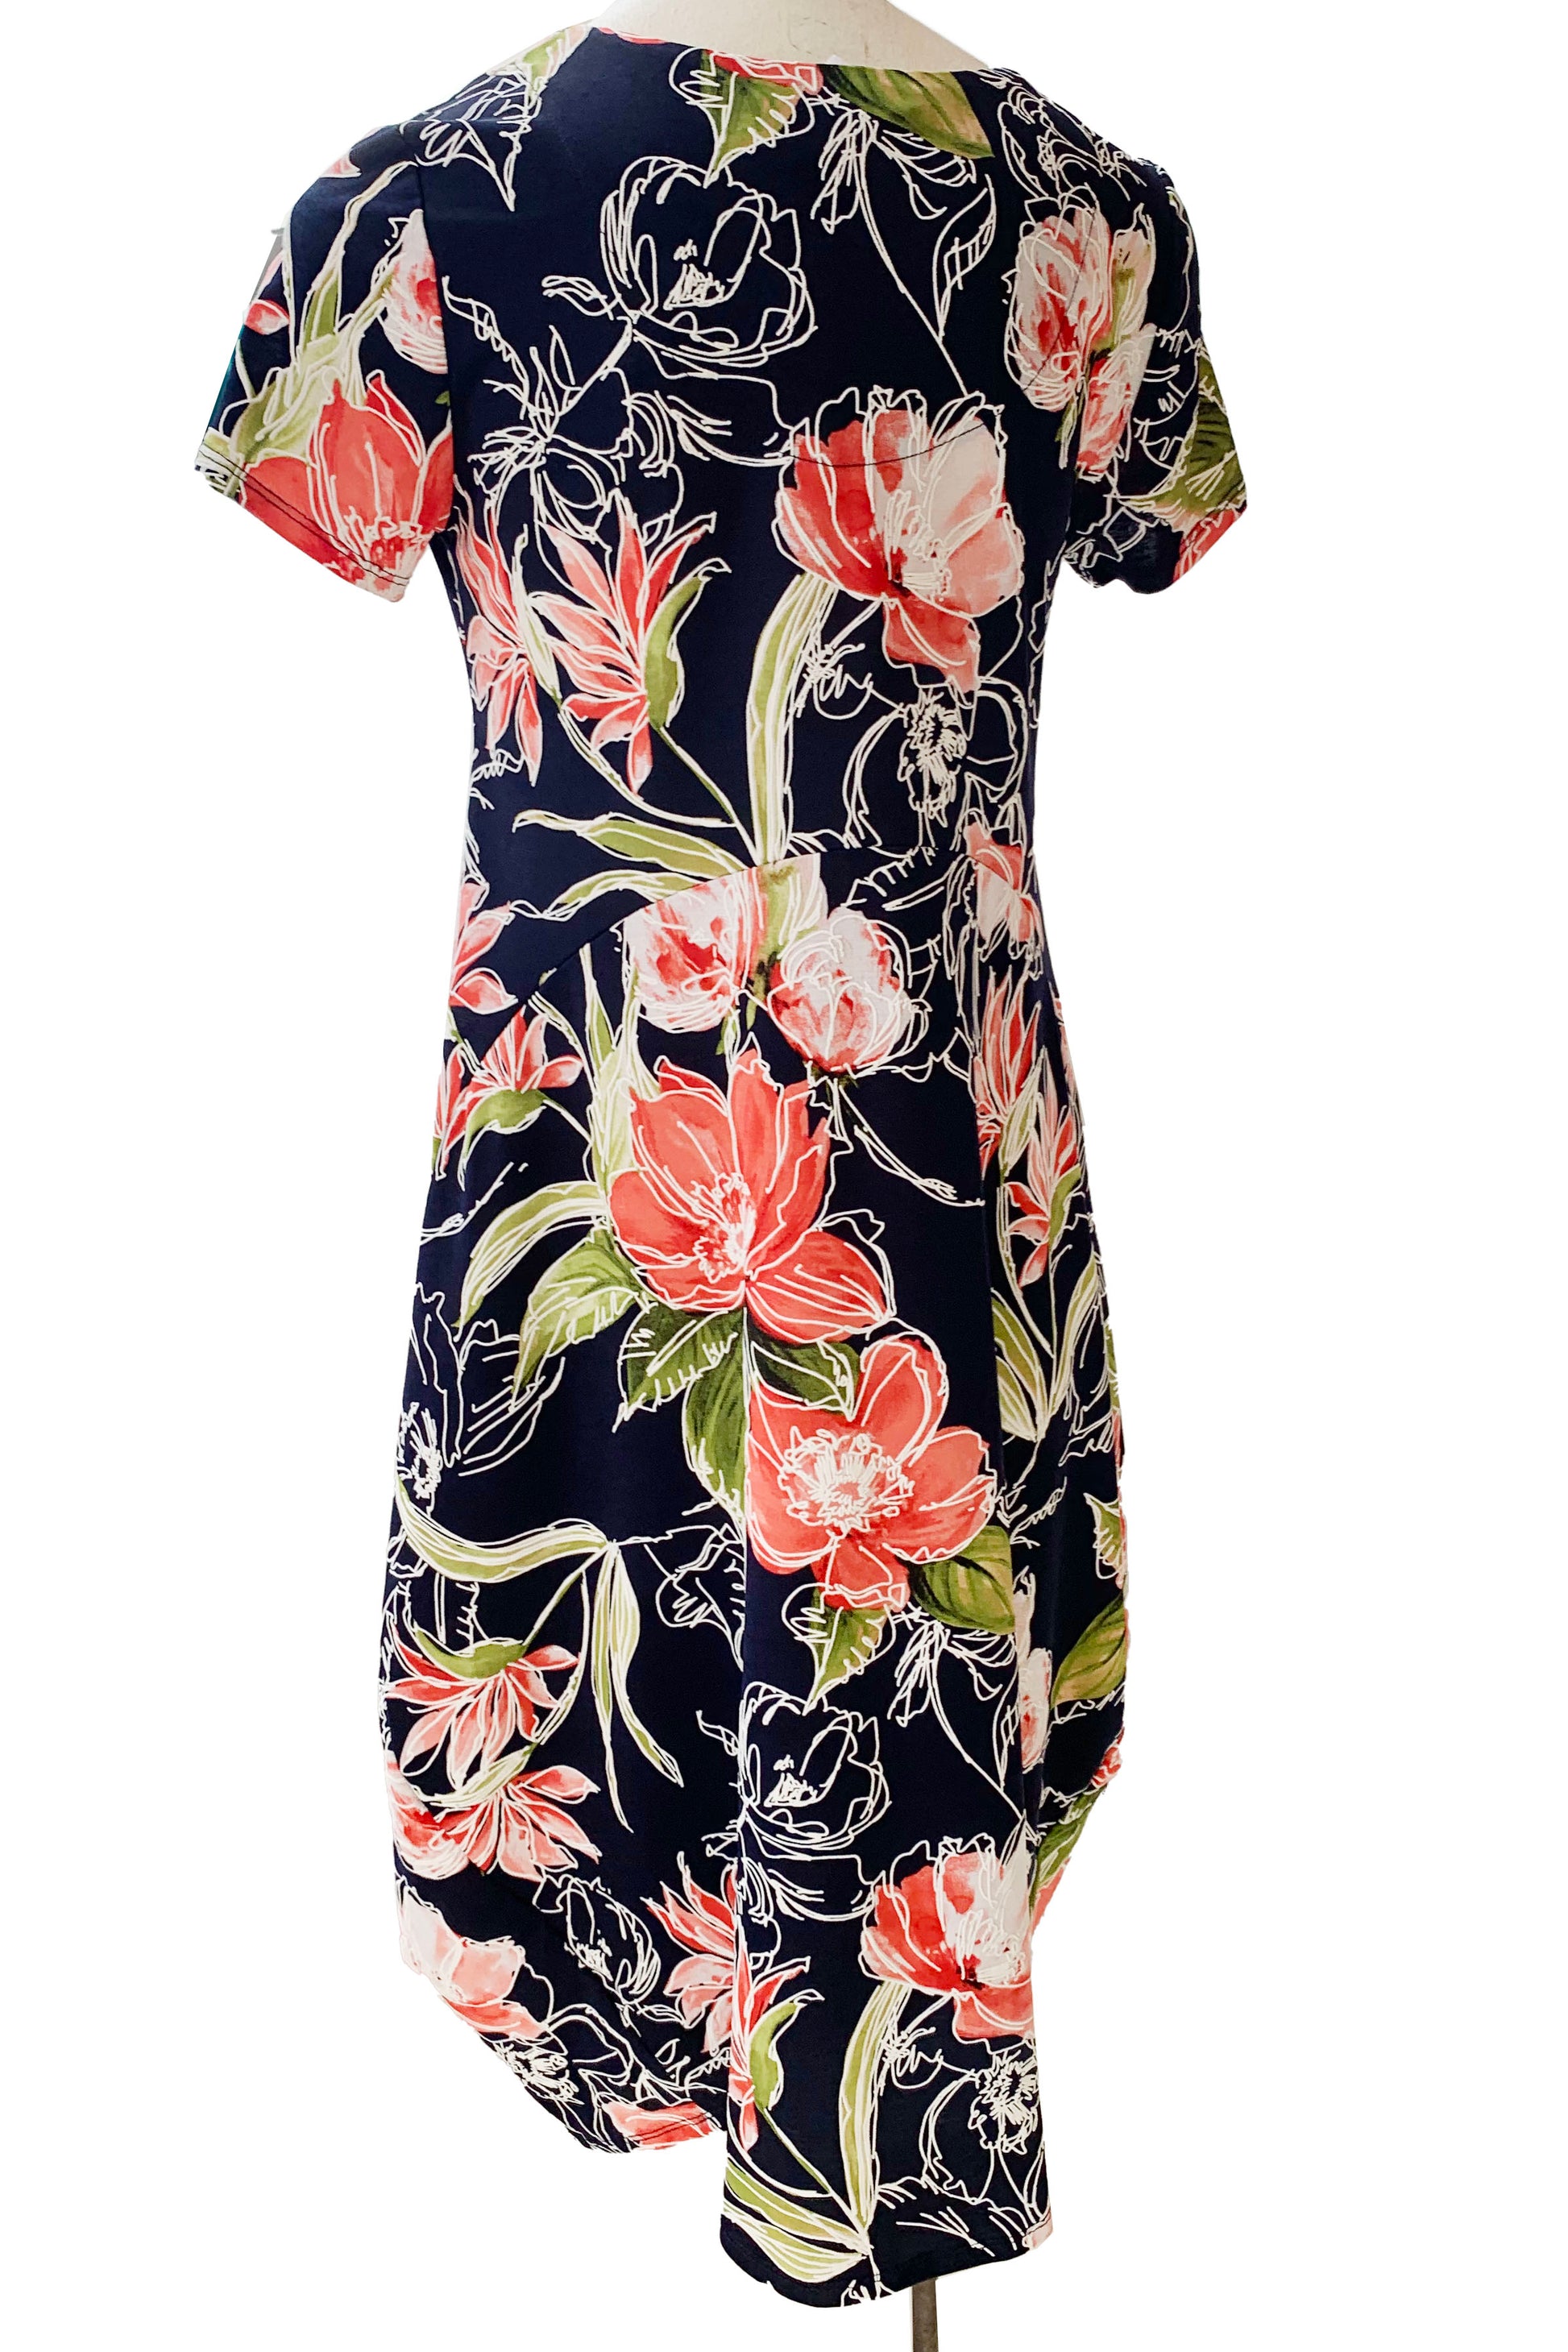 Maddy Dress by Compli K, Navy Floral, back view, short sleeves, round neck, arched seams across the bodice, rounded hem, below the knee, sizes XS to XXL, made in Montreal 